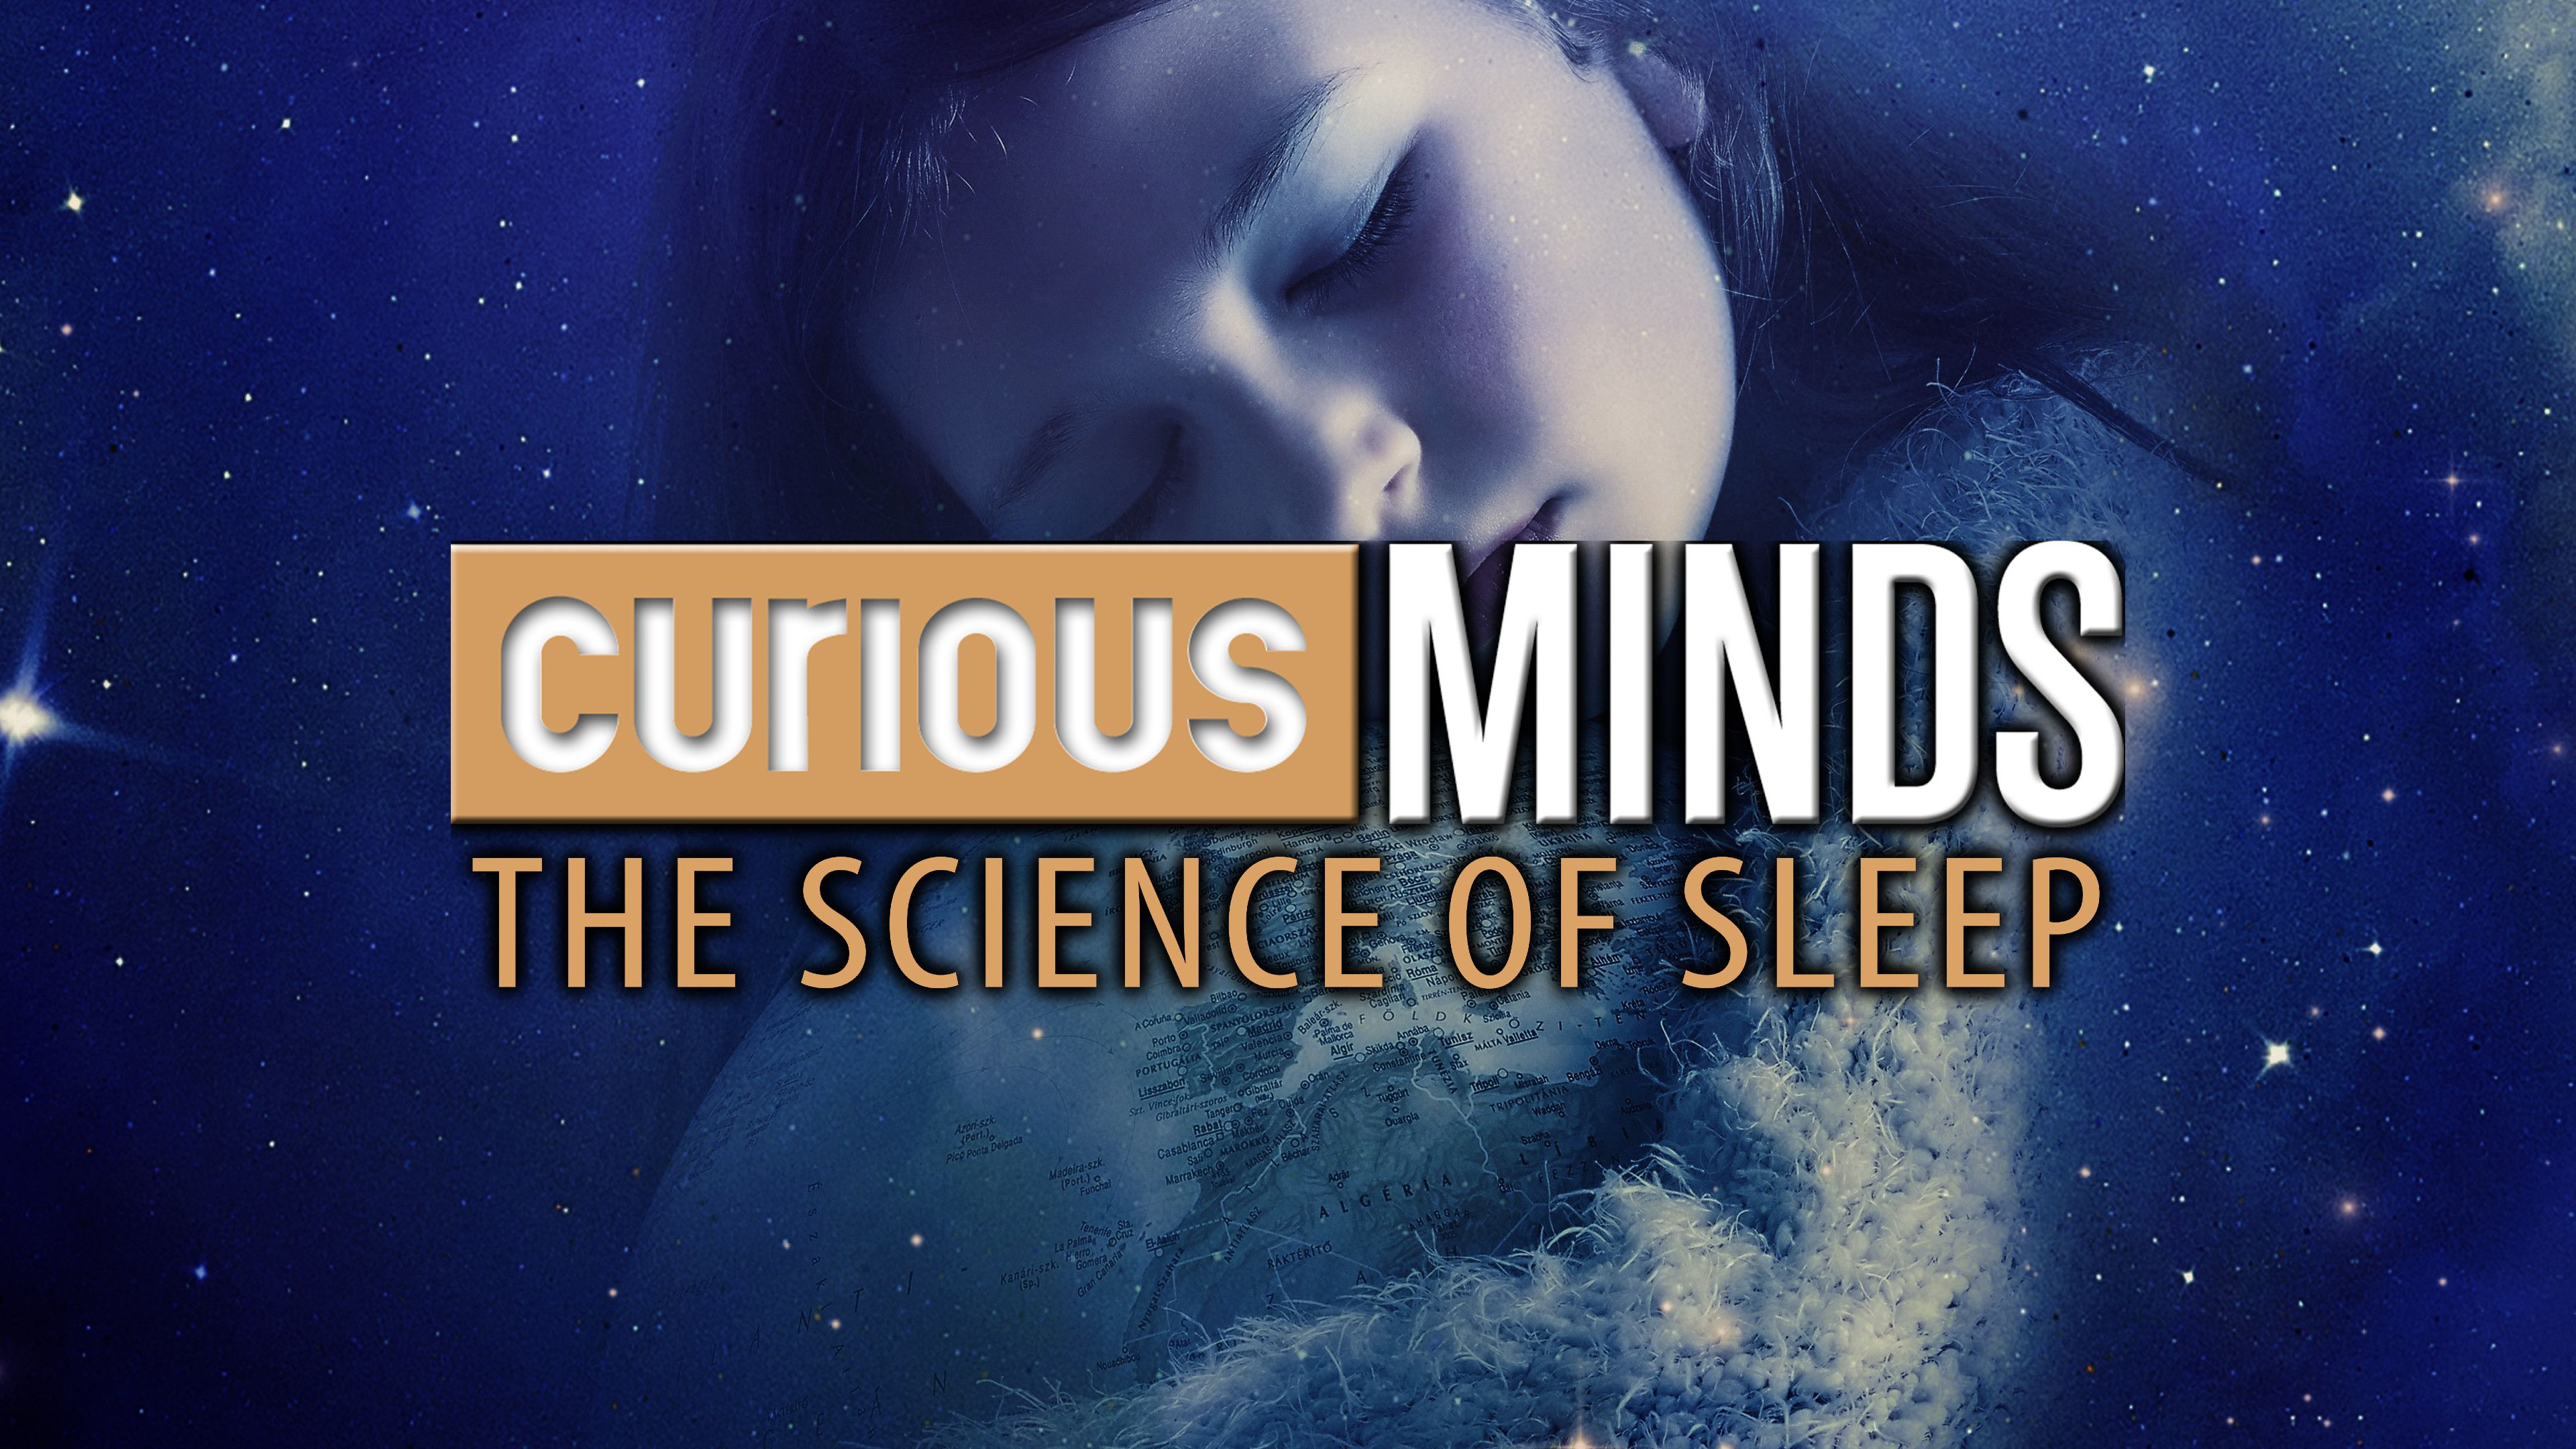 Curious Minds: The Science of Sleep